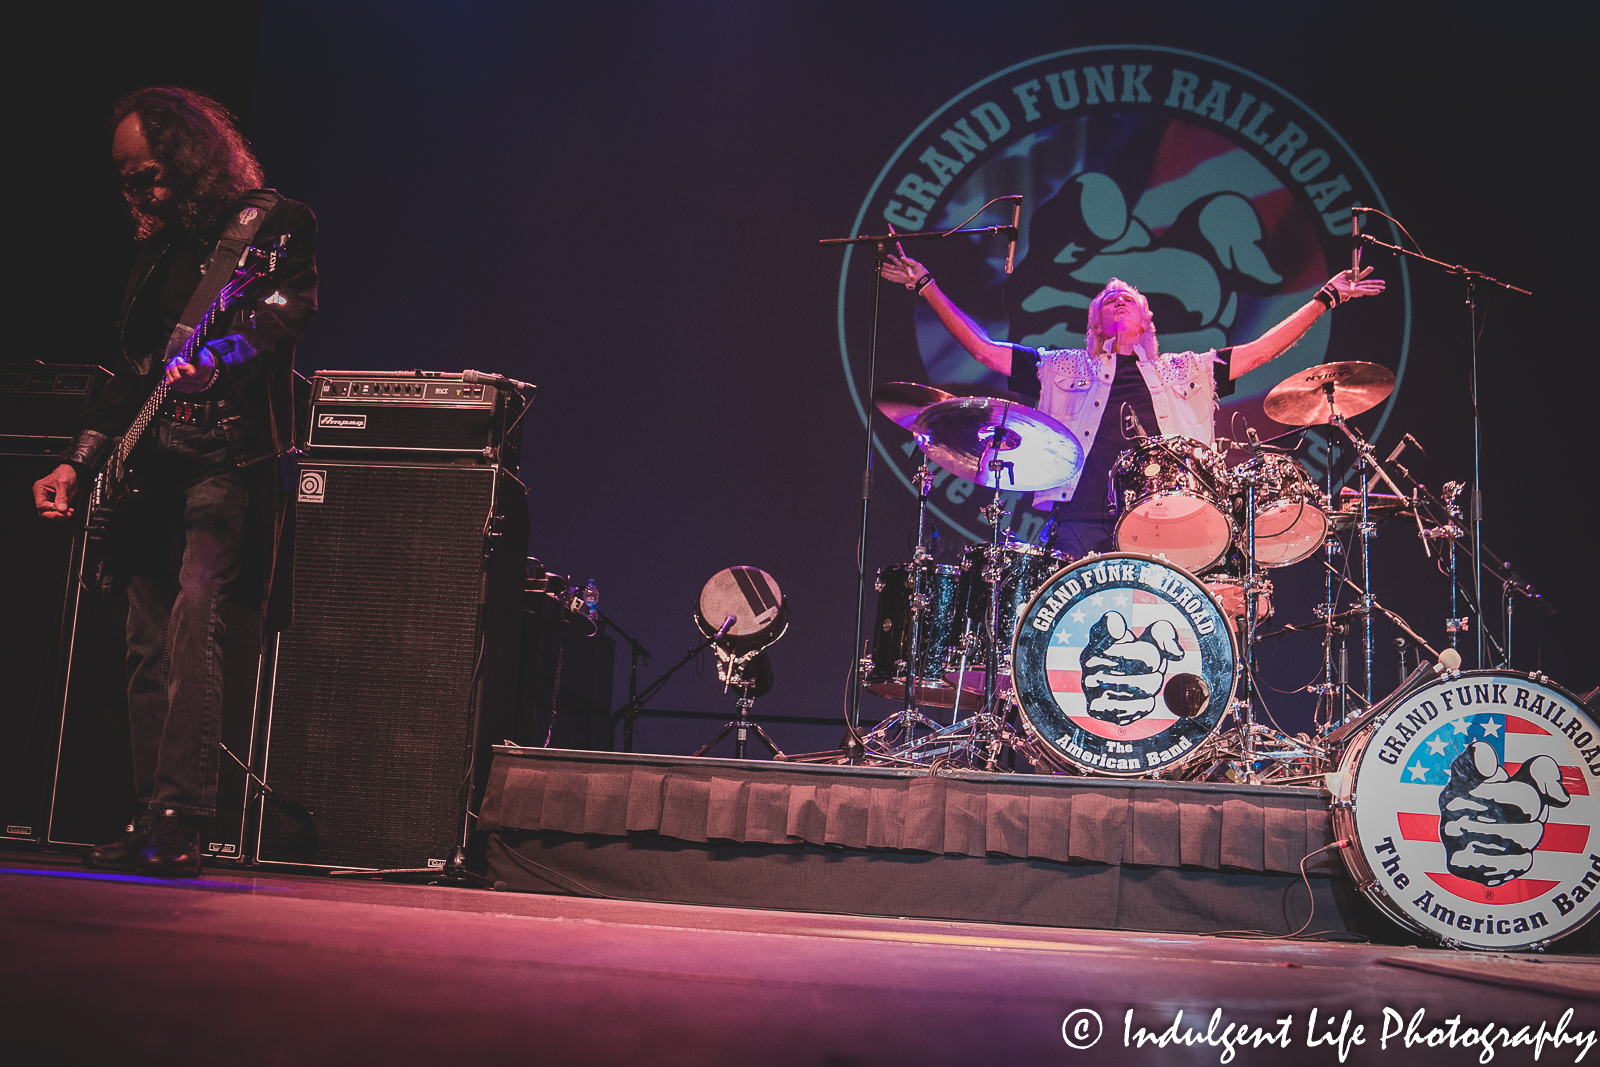 Grand Funk Railroad founding members Don Brewer on drums and Mel Schacher on bass guitar at Star Pavilion inside of Ameristar Casino in North Kansas City, MO on September 18, 2021.